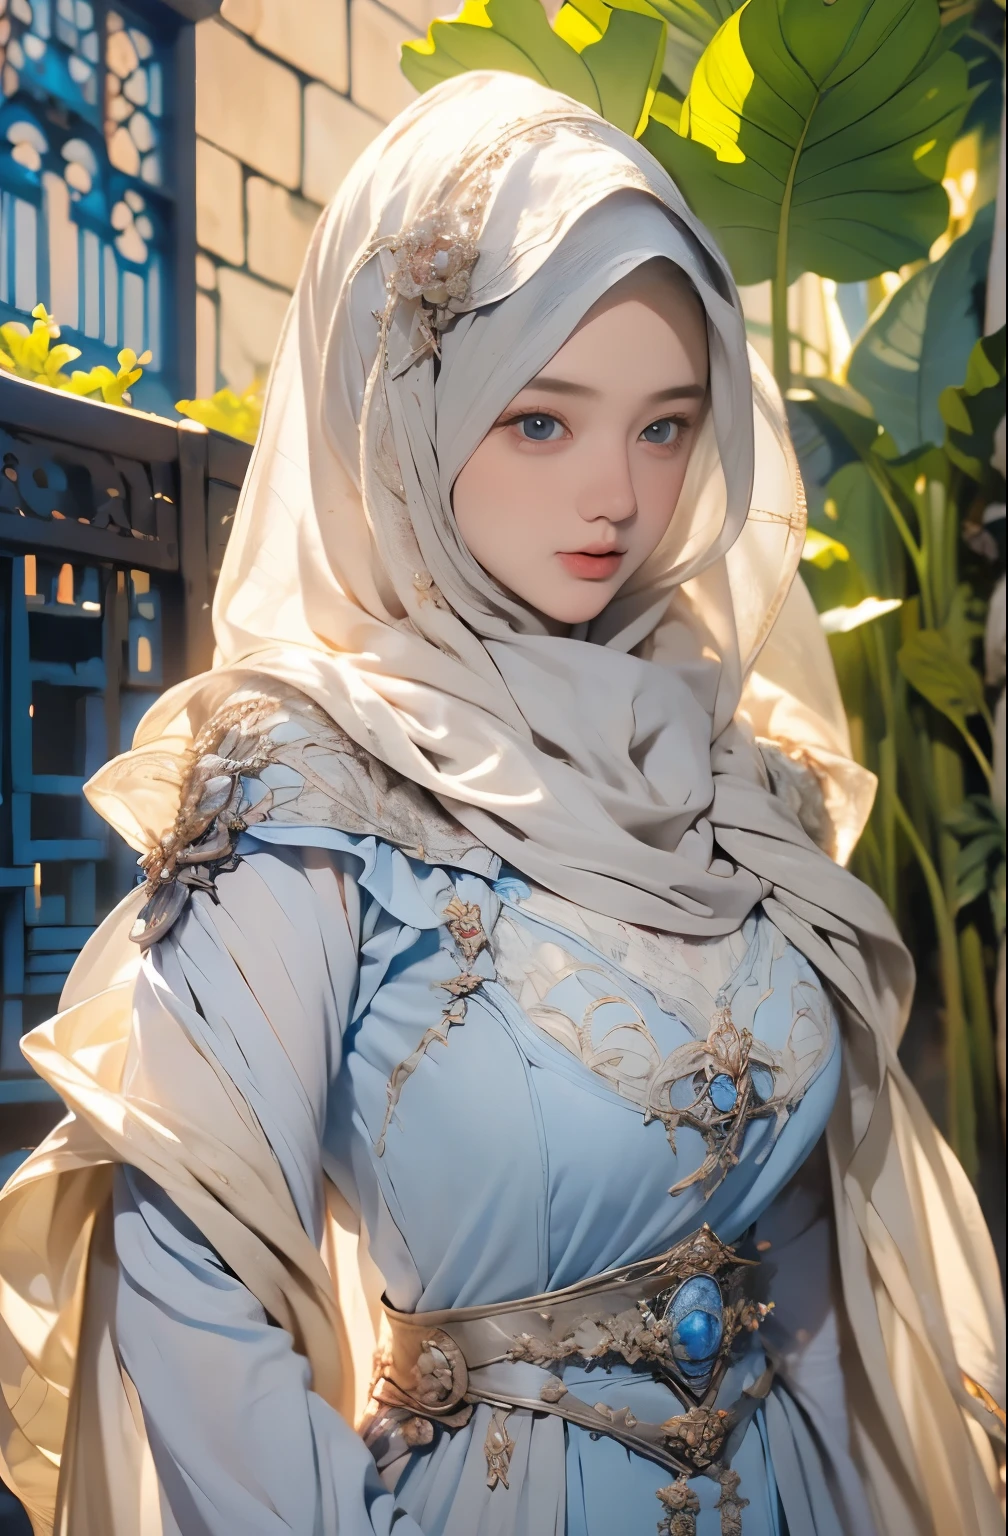 wearing a hijab  , blue eye, blond hair, around 17 years old, (golden silver hijab), tmasterpiece，Best quality at best，A high resolution，8K，((Portrait))，(upper body)，Original photo，real photograph，digital photography，(Female princess in the medieval fantasy style)，(Medieval princess in fantasy style), sexy princess ，blue eye， super colossal brest, round colossal breast extravagant ornament，cparted lips，Keep your mouth shuegant and charming，((Blushing))，virgin contempt，Calm and handsome，(Medieval fantasy dress，The Beautiful super huge round breast, small waist, perfect colossal breast of princess body, a blue delicate pattern，red Cloak)，(princes medieval character medieval fantasy style，oc render reflection texture, sexy style,  sexy colossal breast , medieval castle background, slim body, very small waist, 